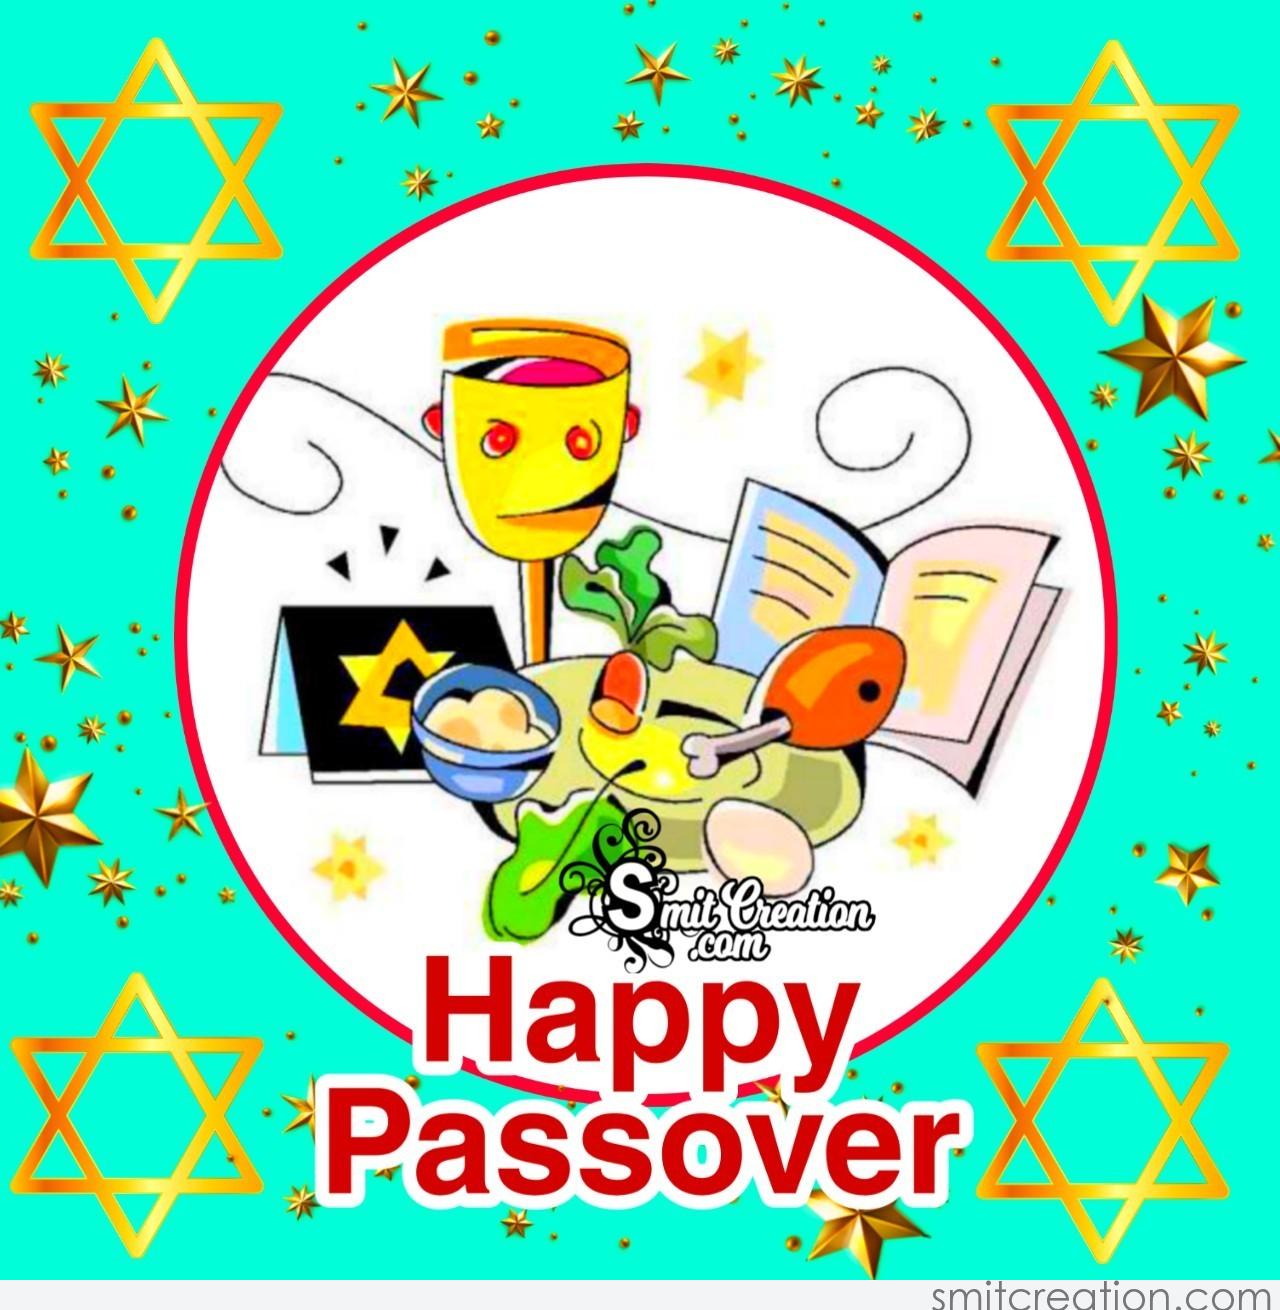 20+ Passover Day - Pictures and Graphics for different festivals